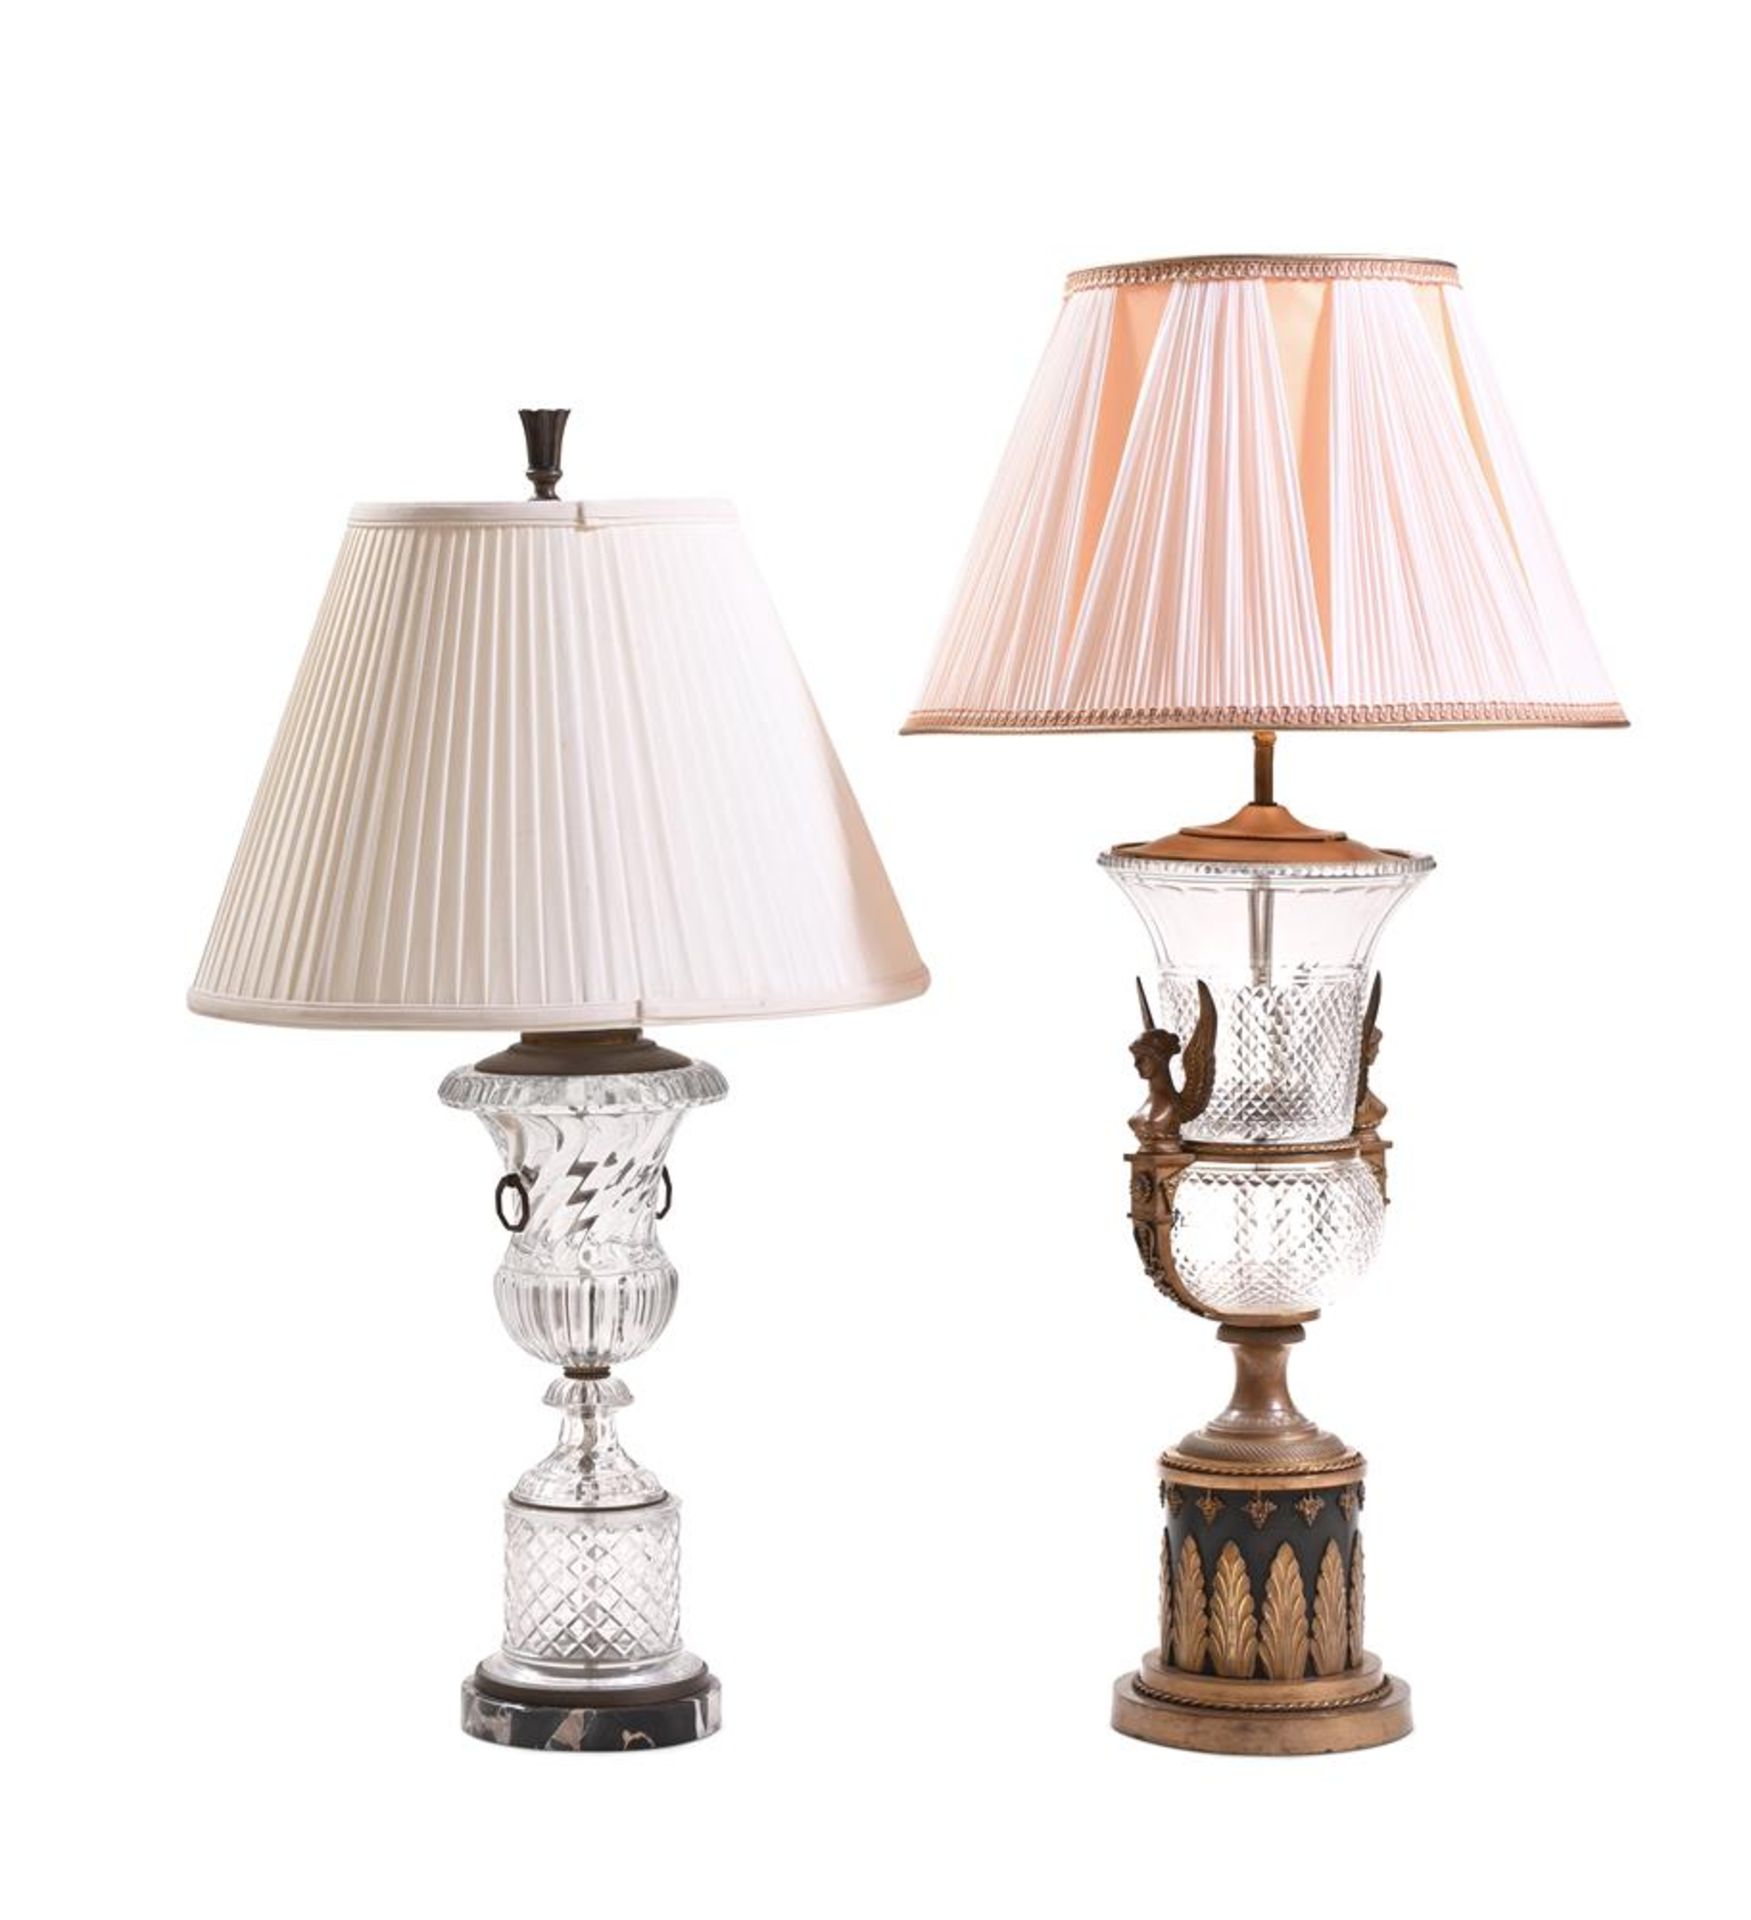 TWO FRENCH STYLE AND GILT METAL MOUNTED PRESSED MOLDED GLASS URN SHAPED LAMP BASES